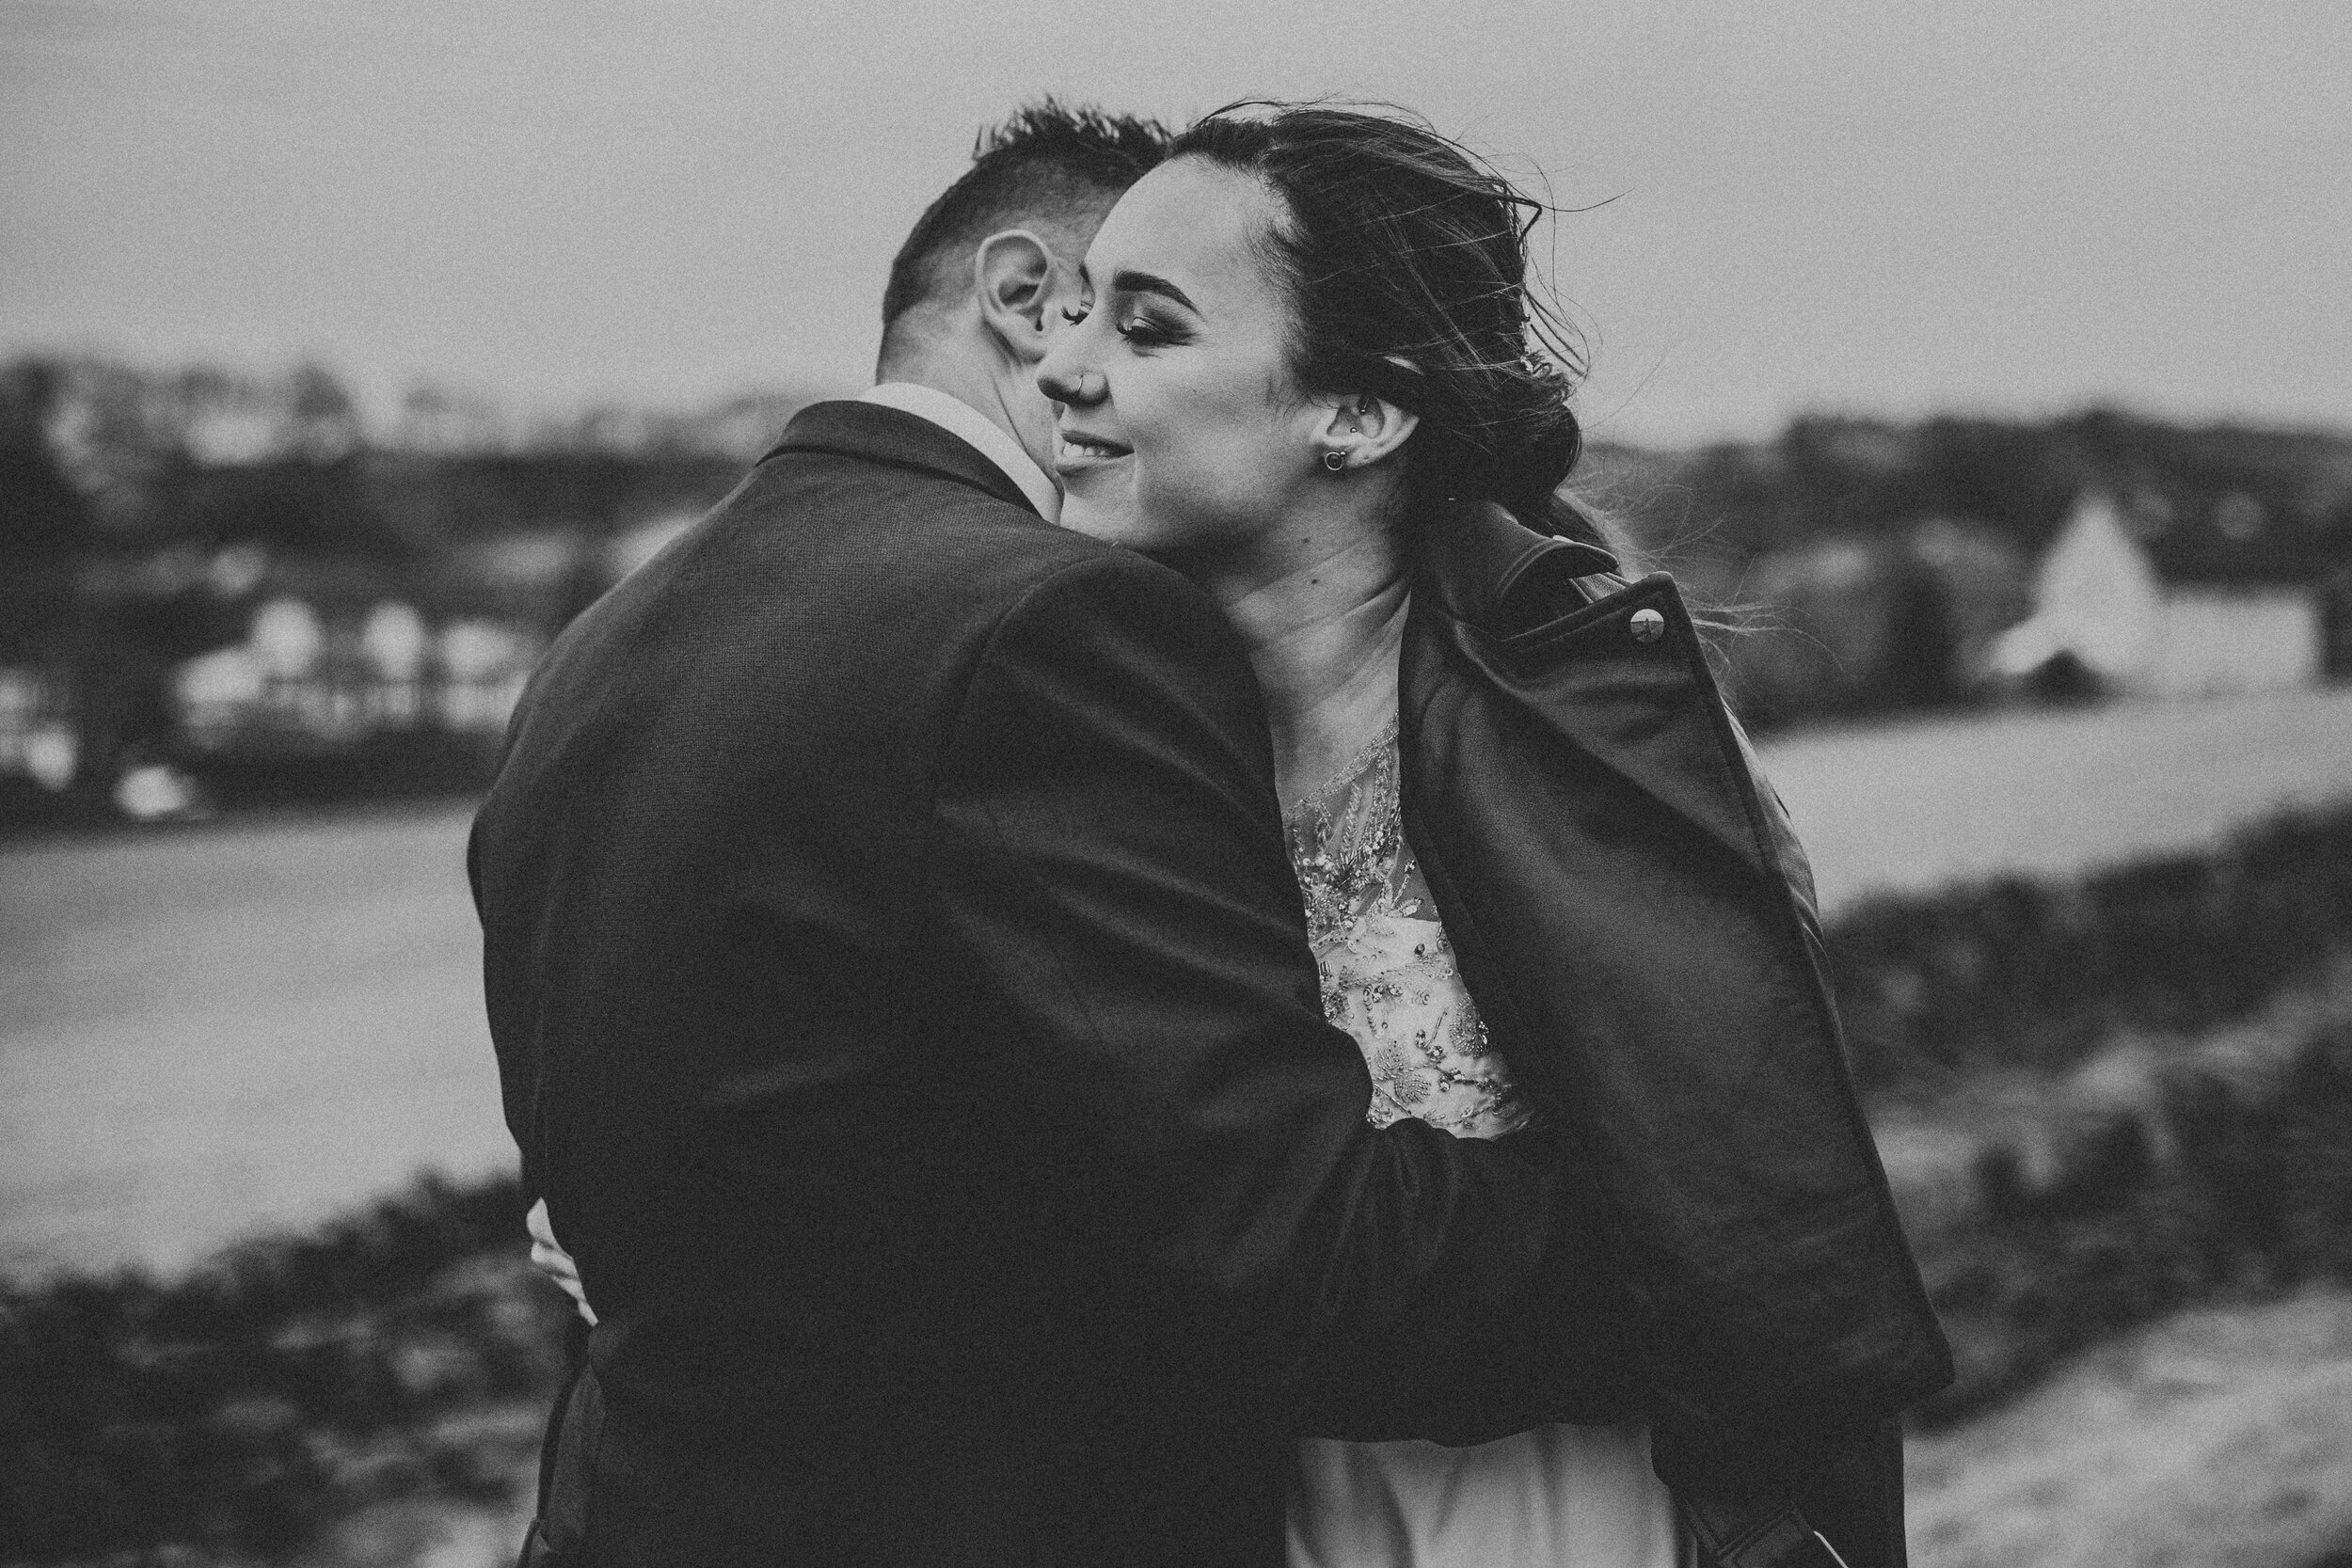 Bride and groom hug, photo in black and white